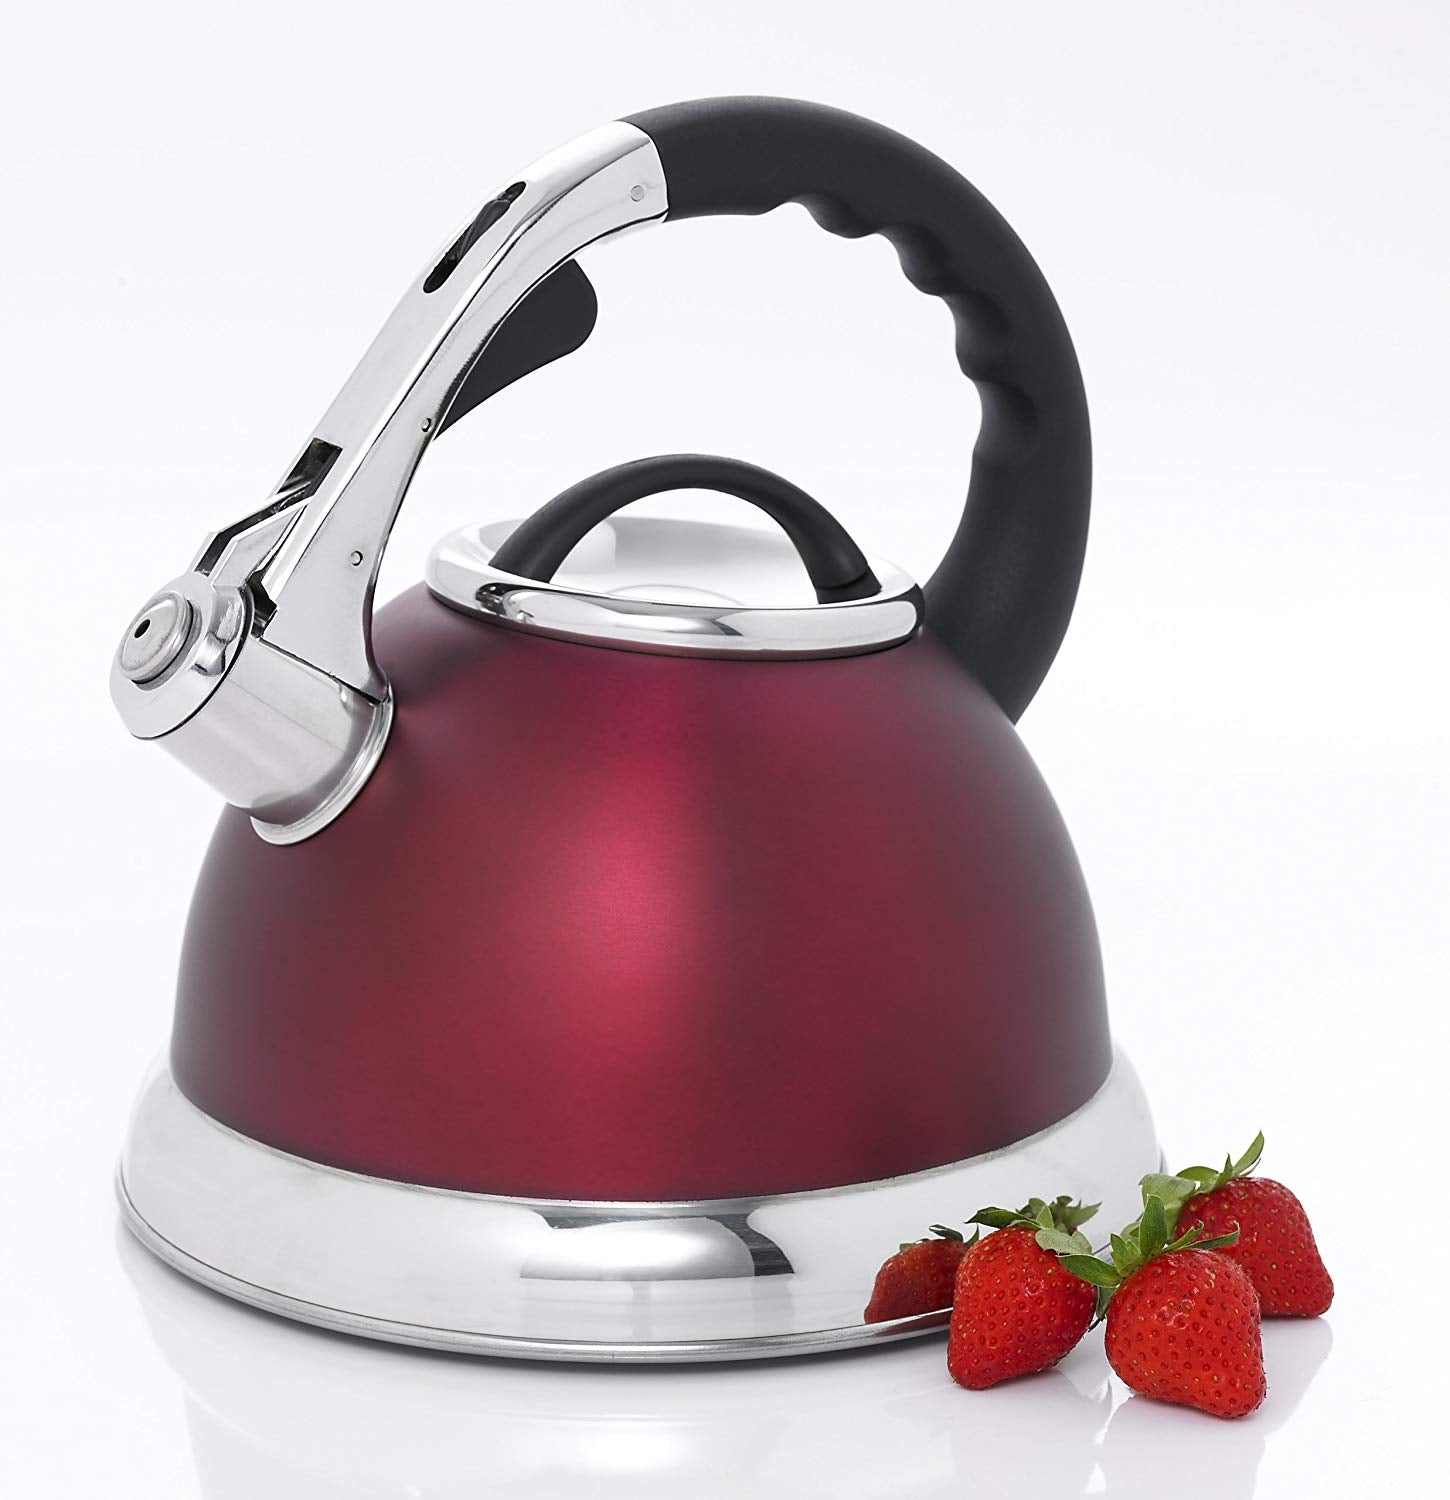 Red Whistling Tea Kettle by Home-Style Kitchen - Walter Drake